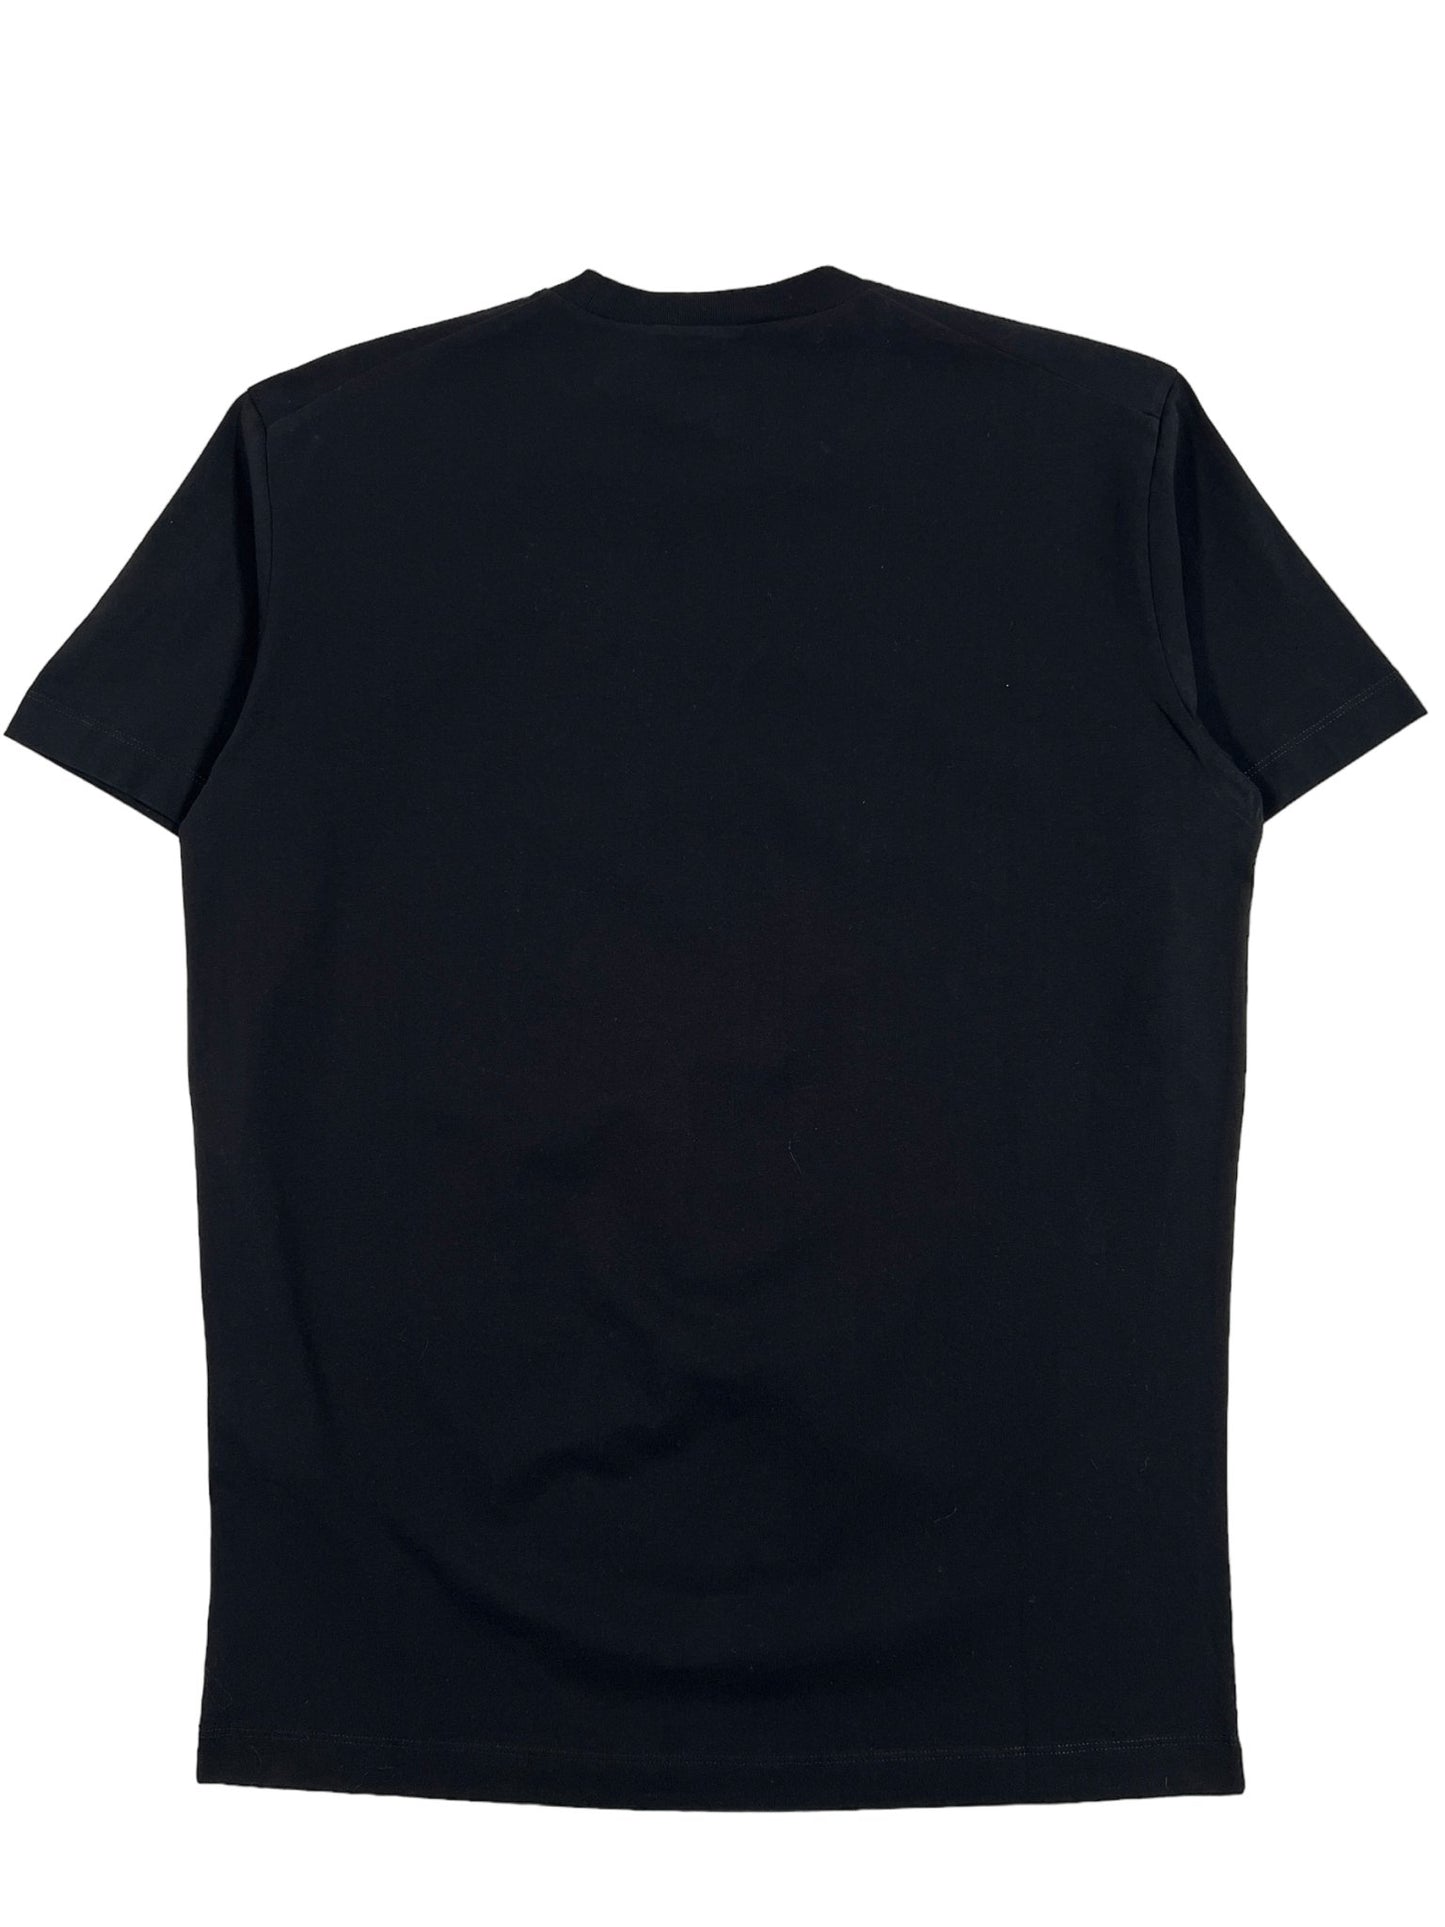 Probus DSQUARED S74GD1221 COOL FIT TEE BLACK DSQUARED S74GD1221 COOL FIT TEE BLACK M